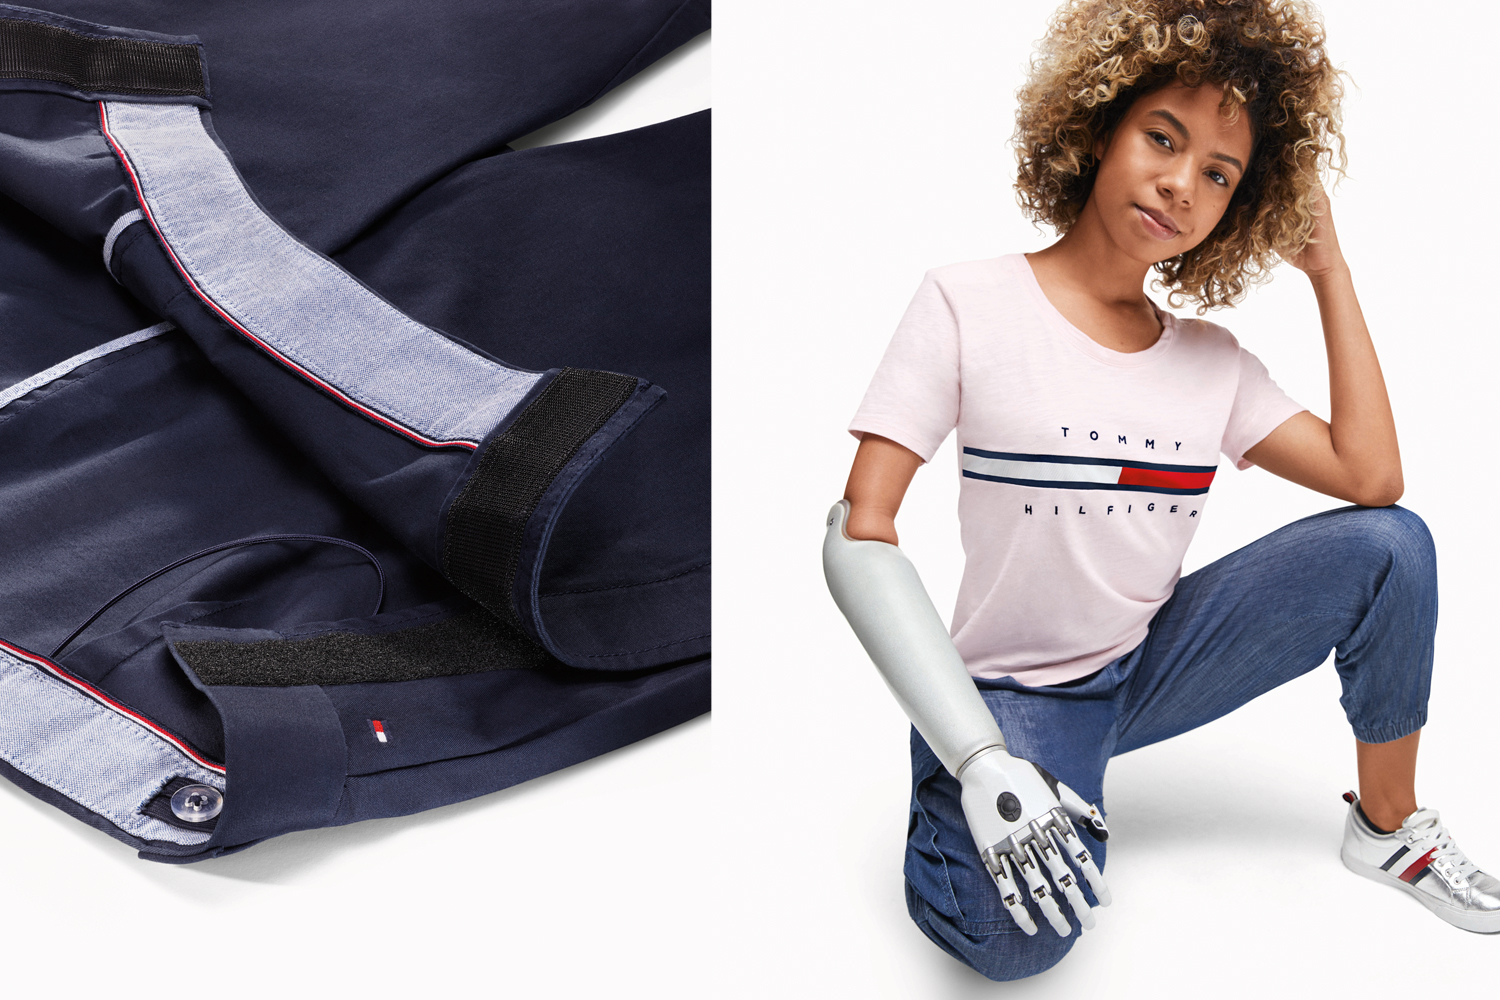 Tommy Hilfiger's Adaptive Collection Partners With EveryHuman - NZ